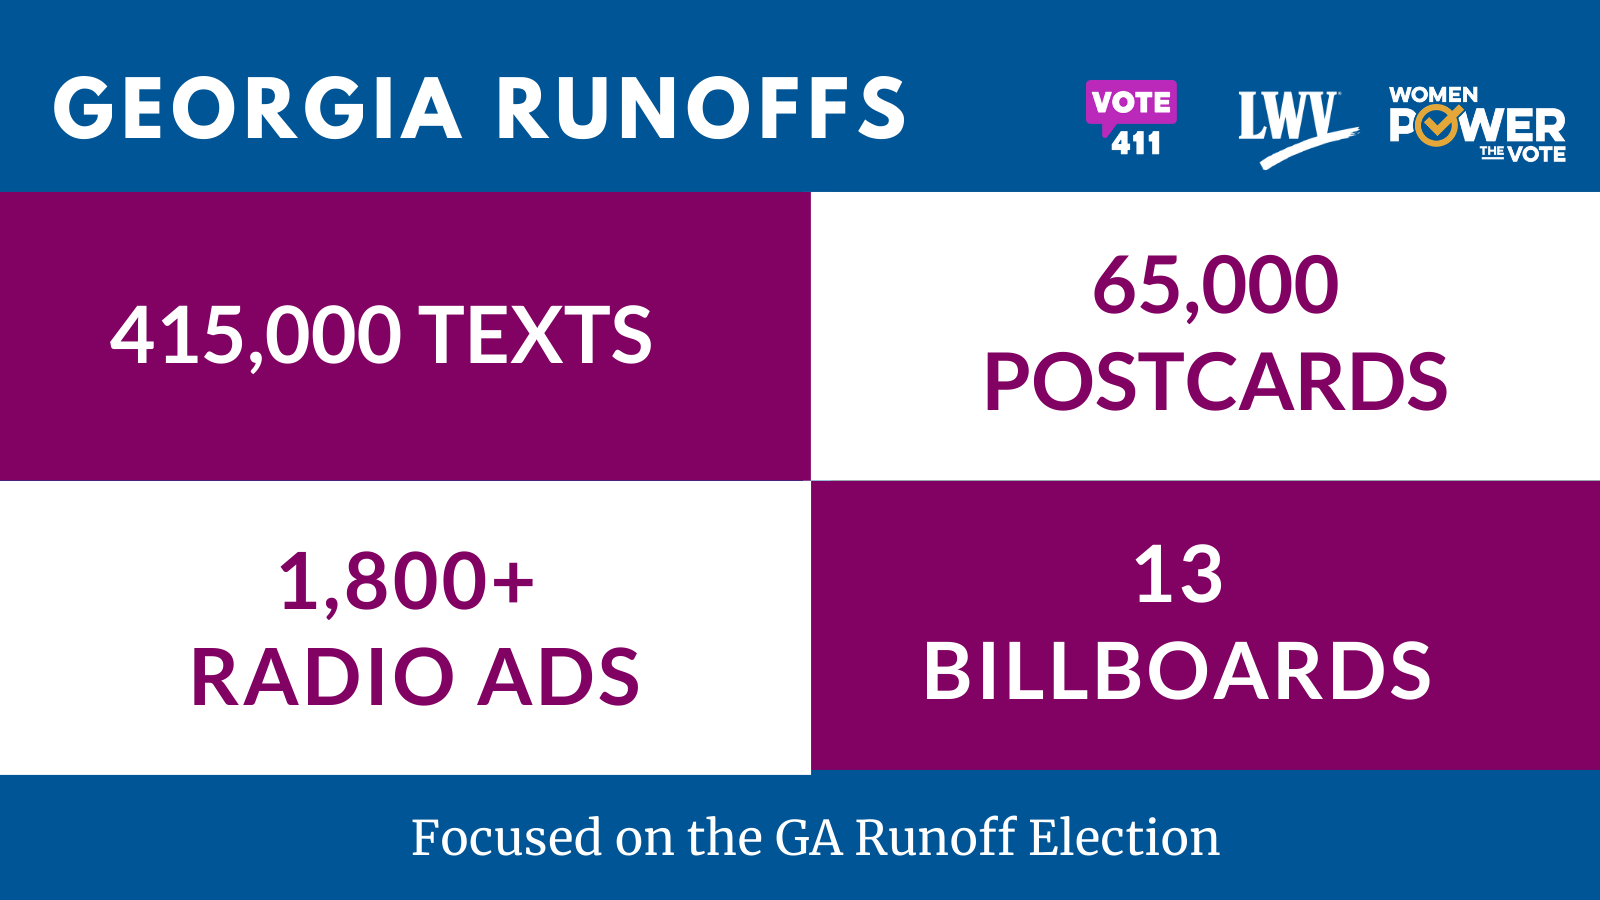 Stats on the League's work in the GA runoff